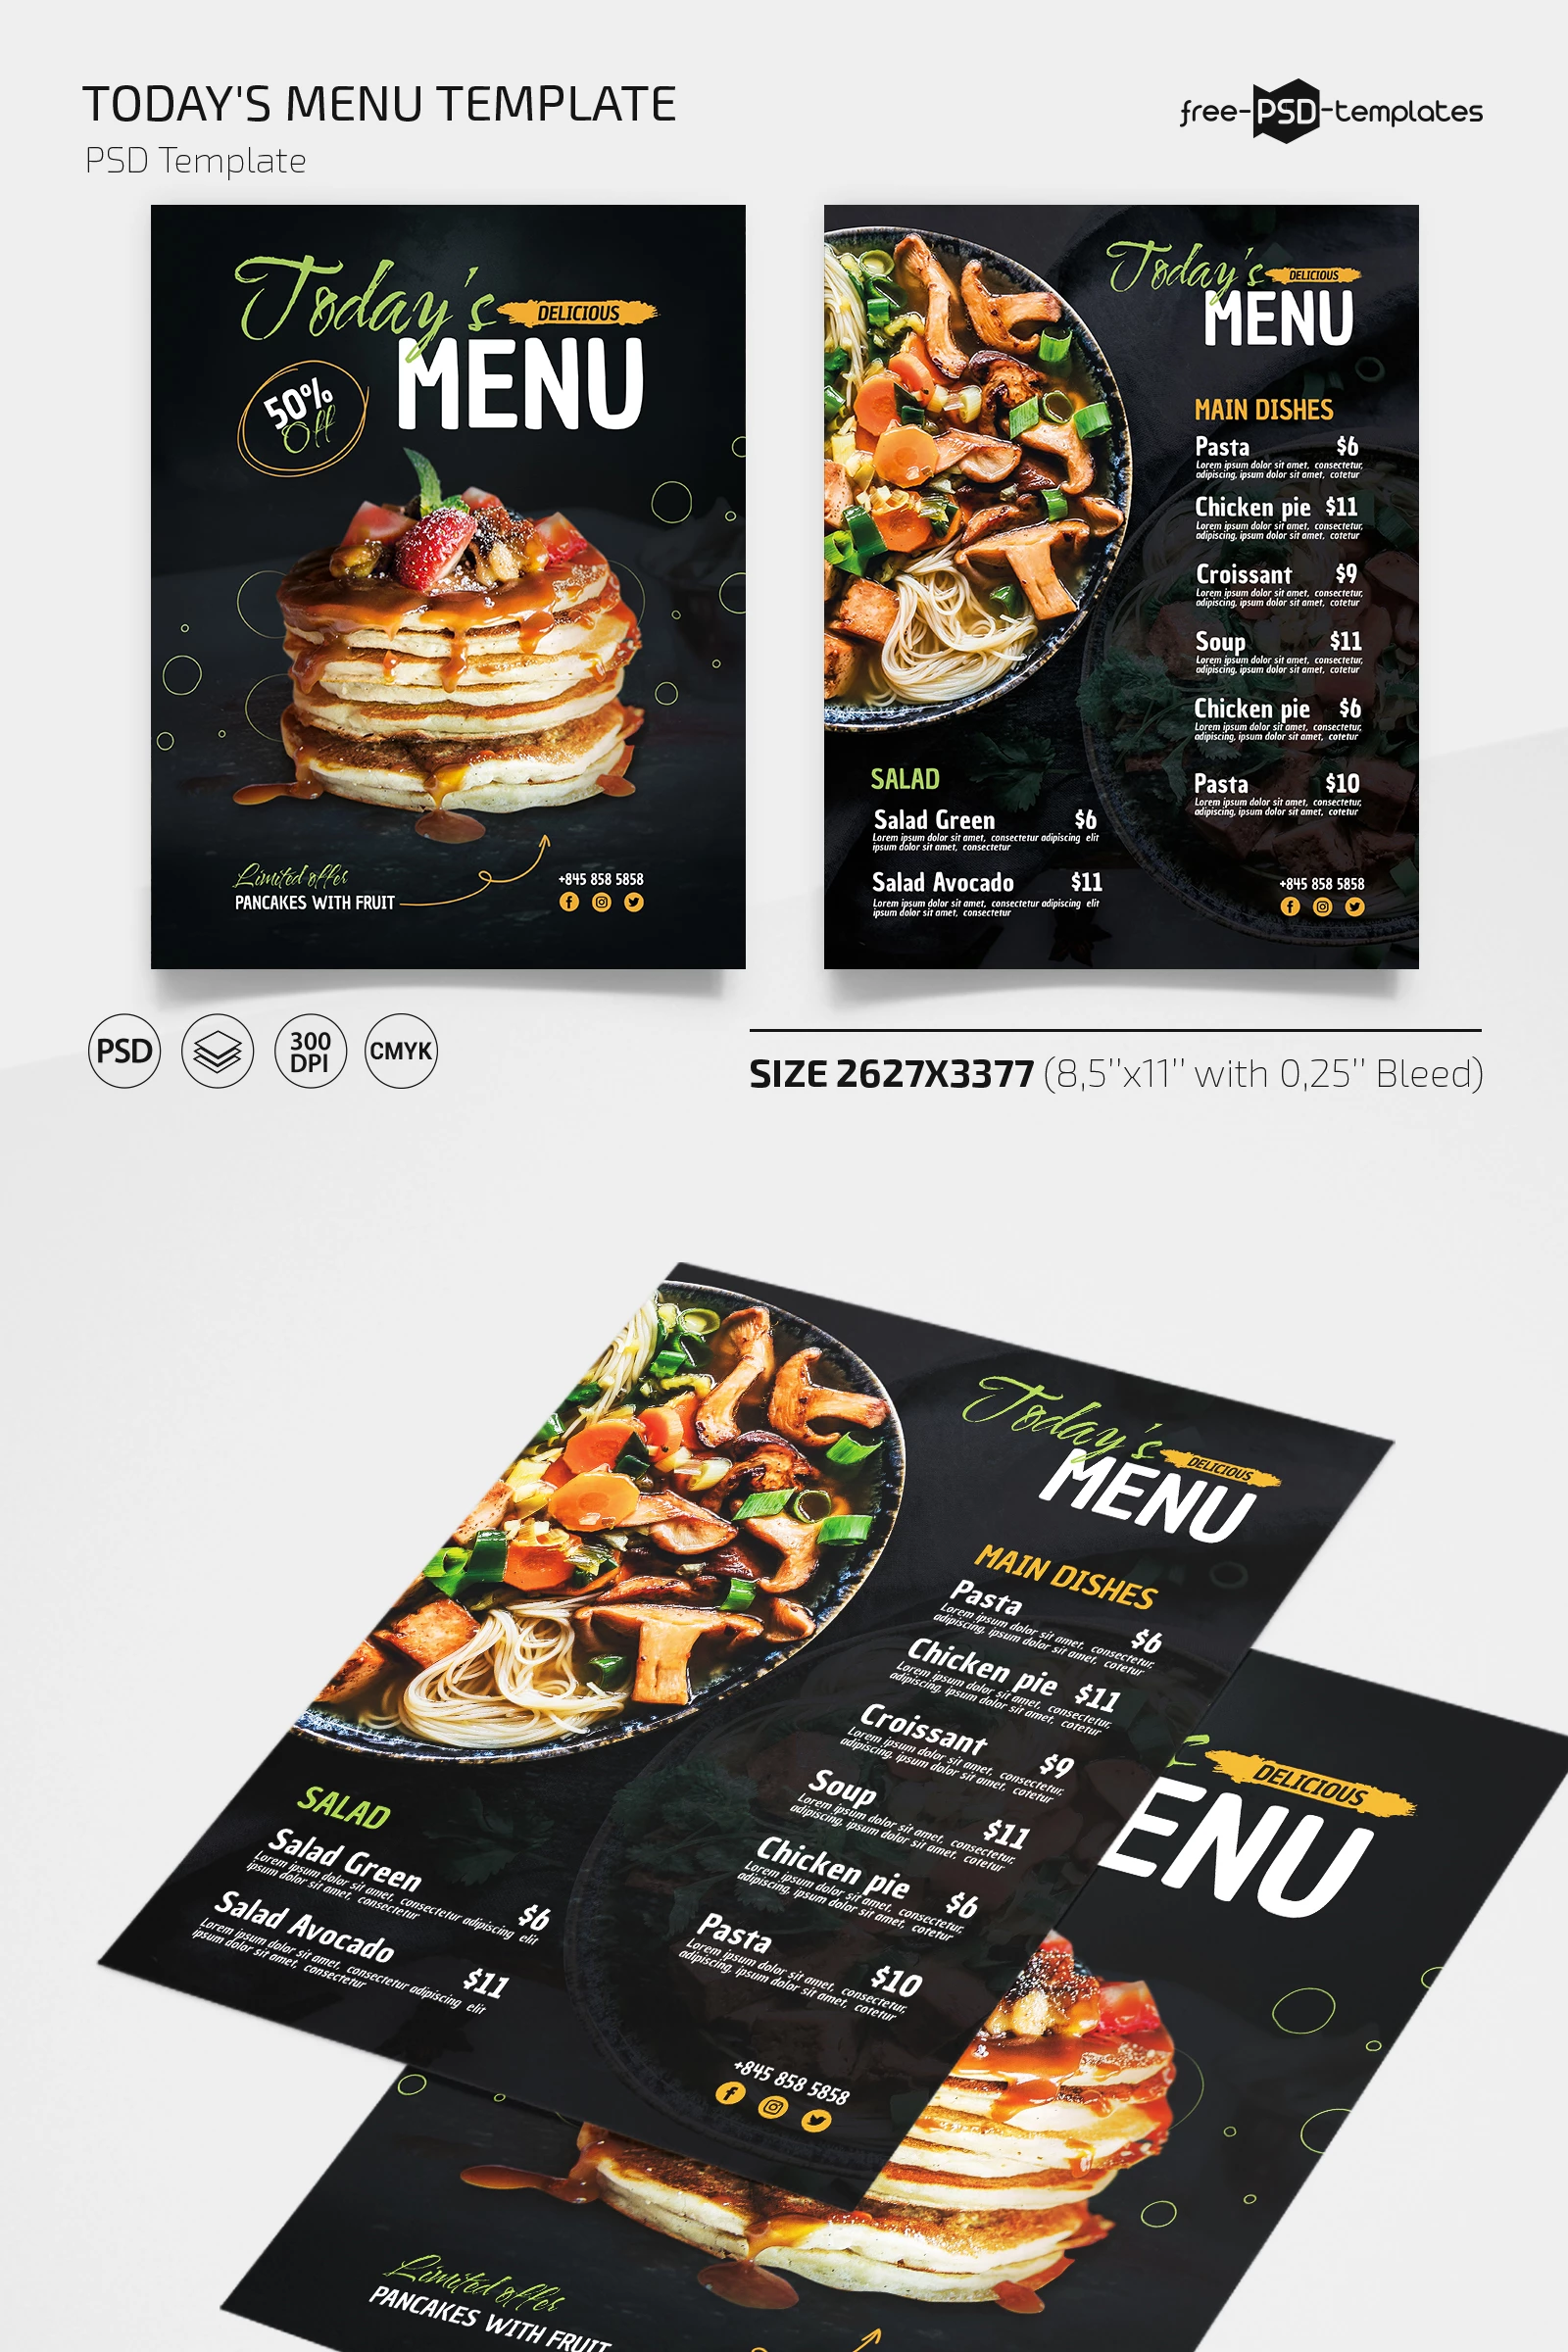 Free Today’s Menu Template